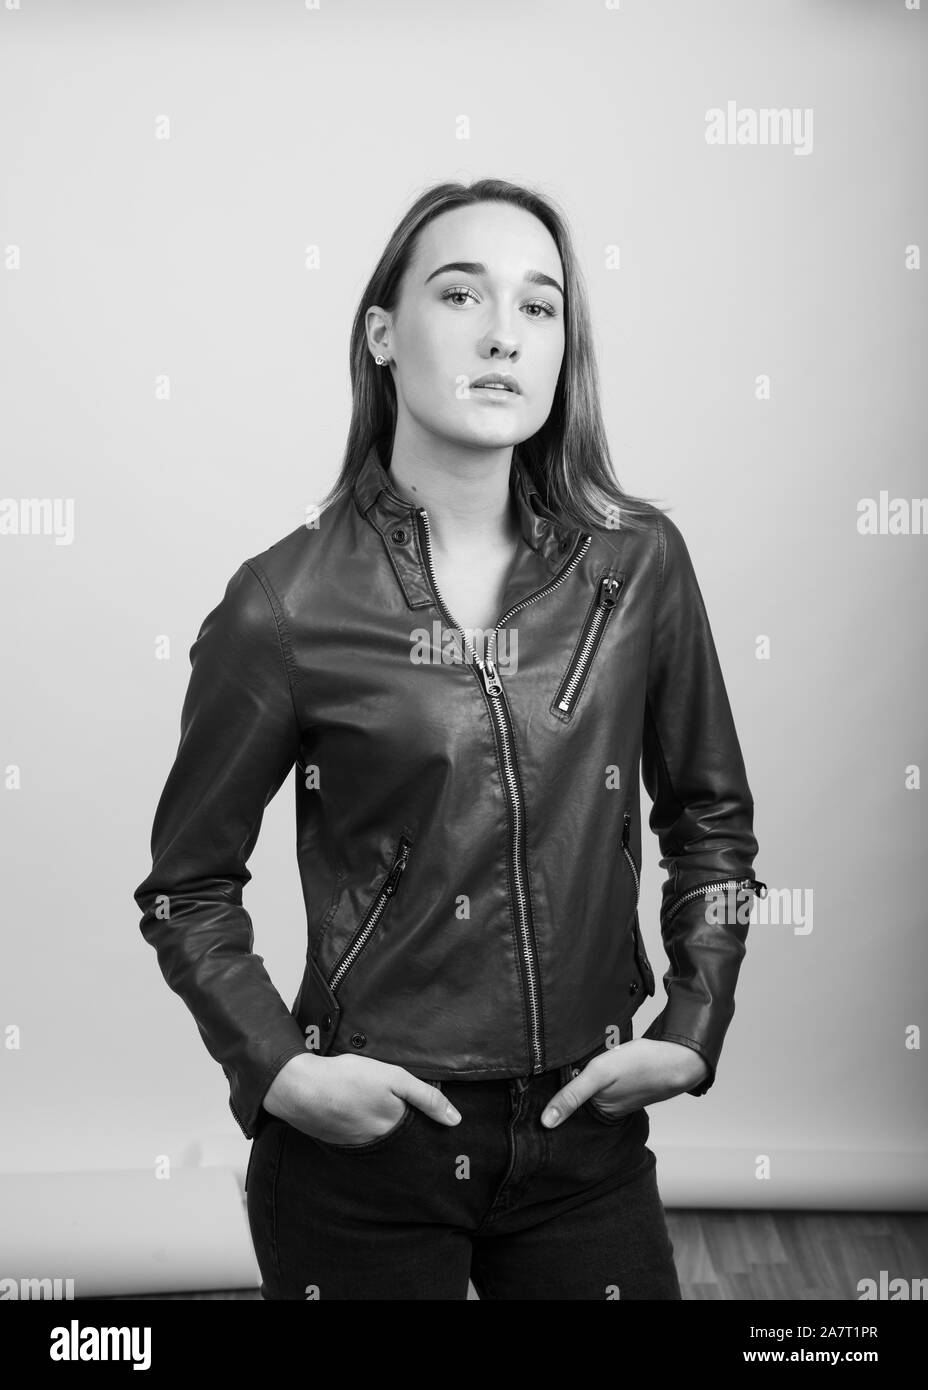 Grayscale portrait of a young woman wearing a leather jacket Stock Photo